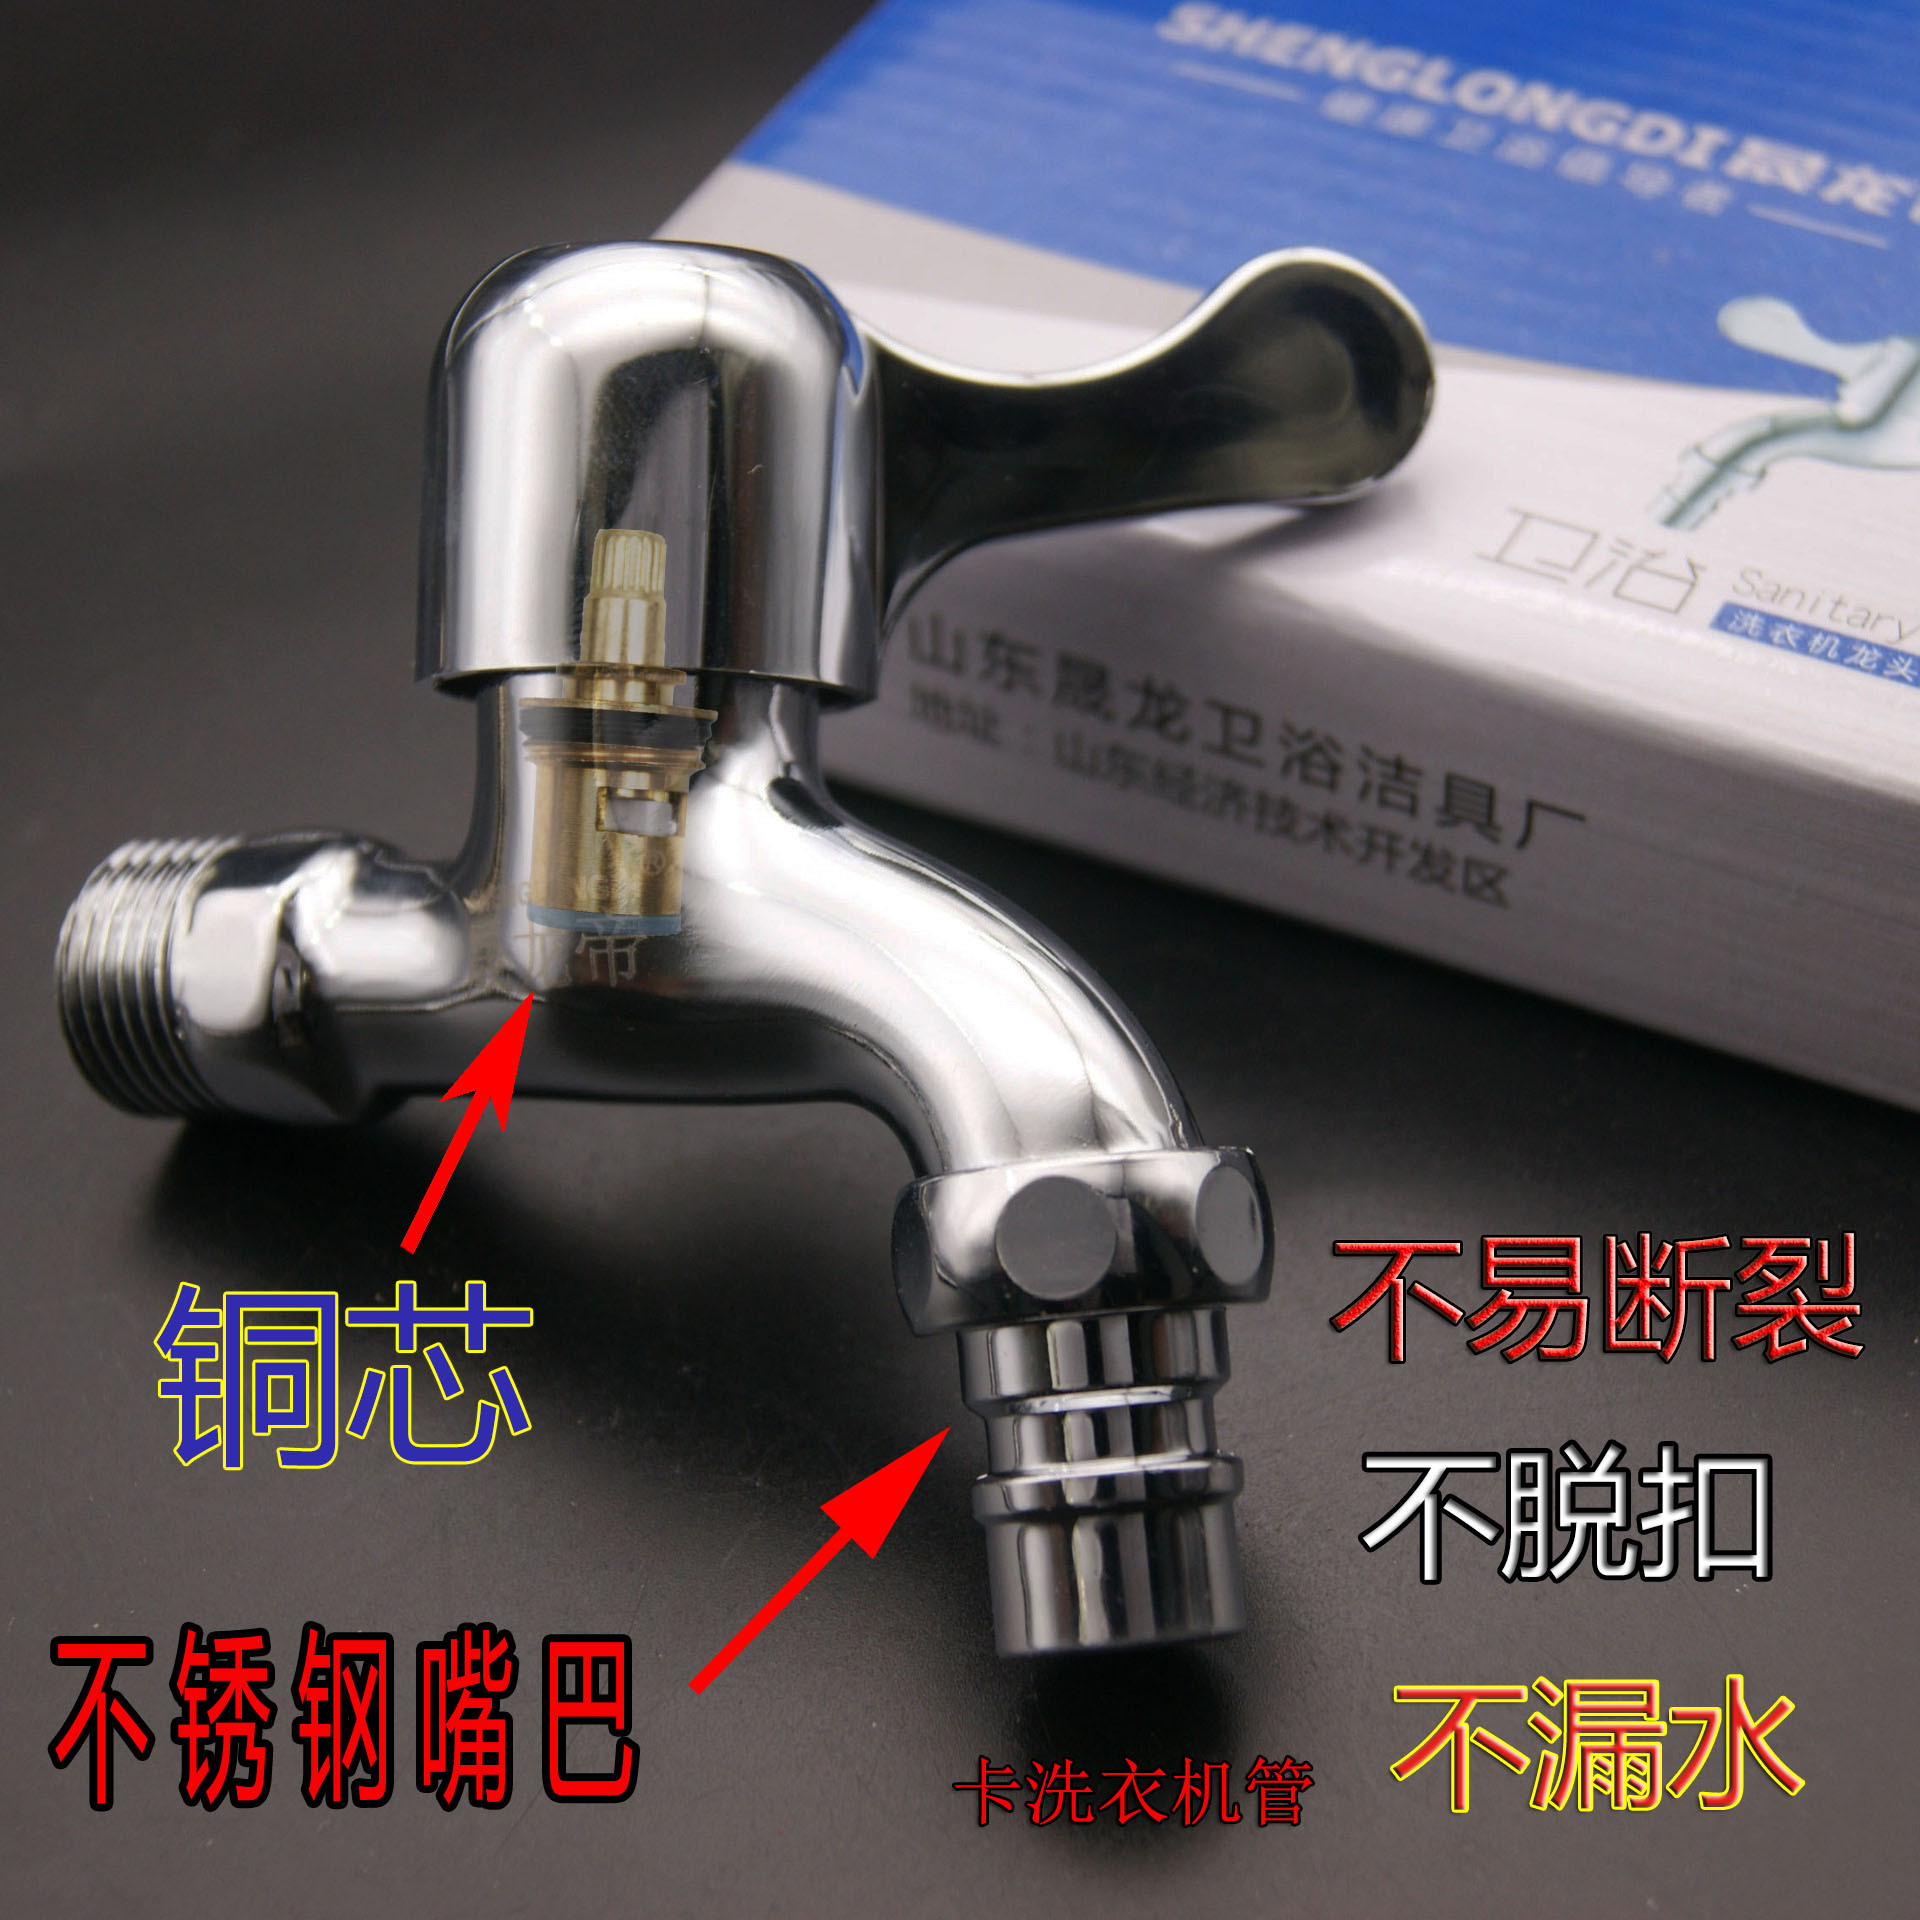 Manufacturers Supply Zinc Alloy Stainless Steel Copper Core Washing Machine Faucet Automatic Washing Machine Water Nozzle Automatic Faucet